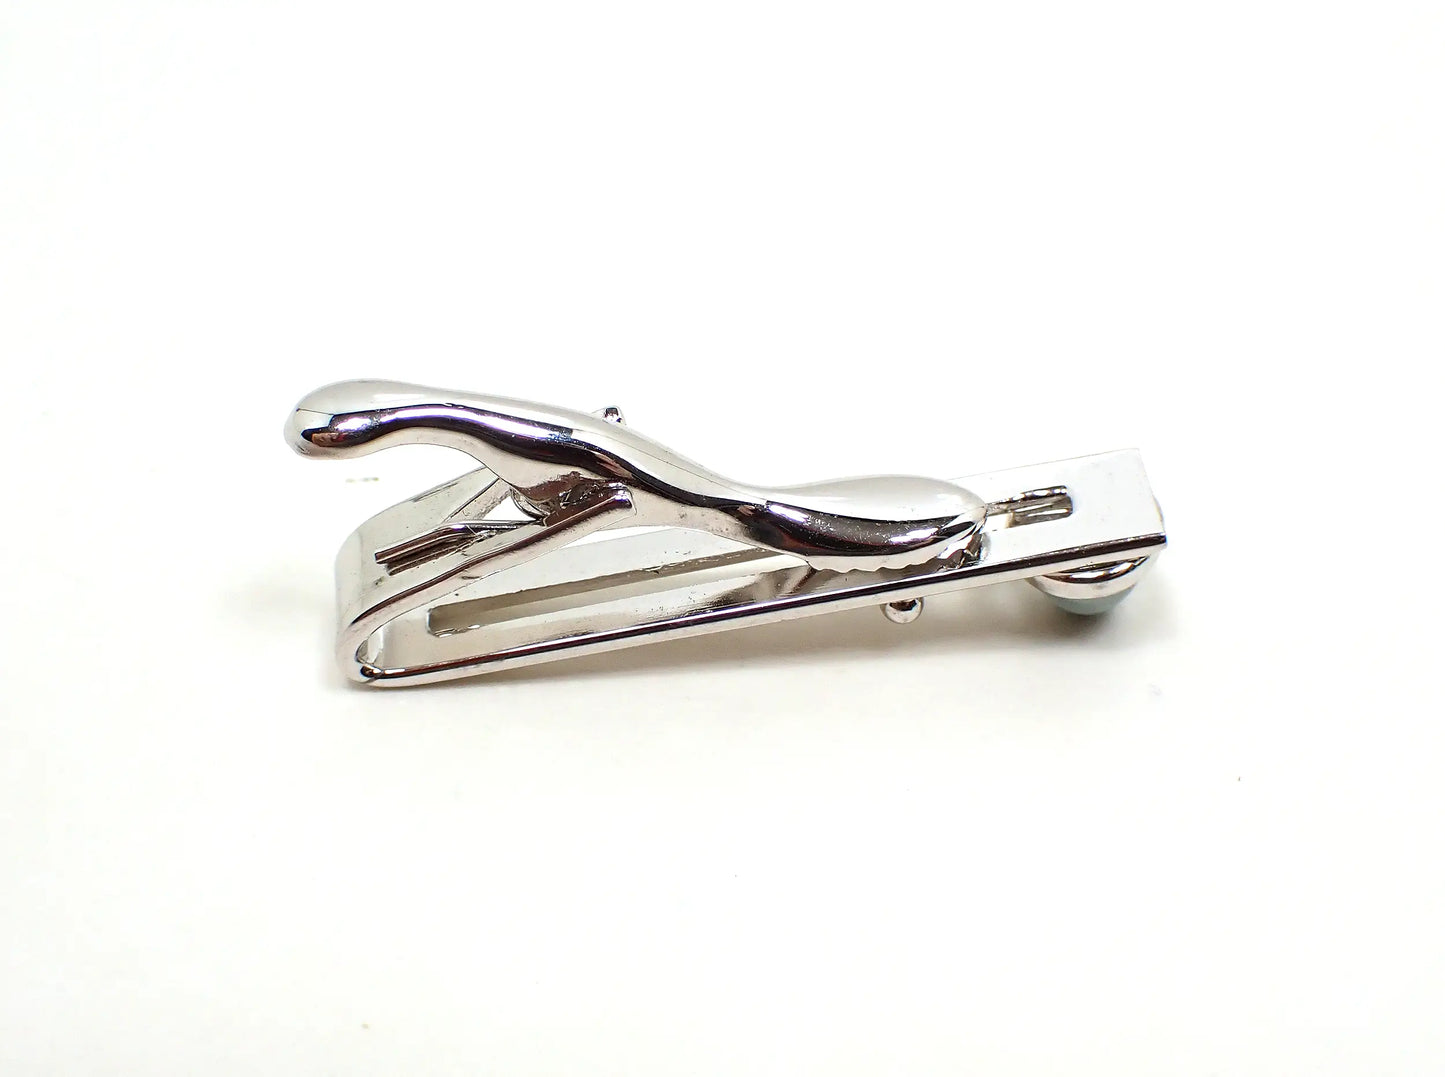 Domed Blue Gray Lucite Retro Vintage Tie Clip Clasp, Silver Tone Plated Metal